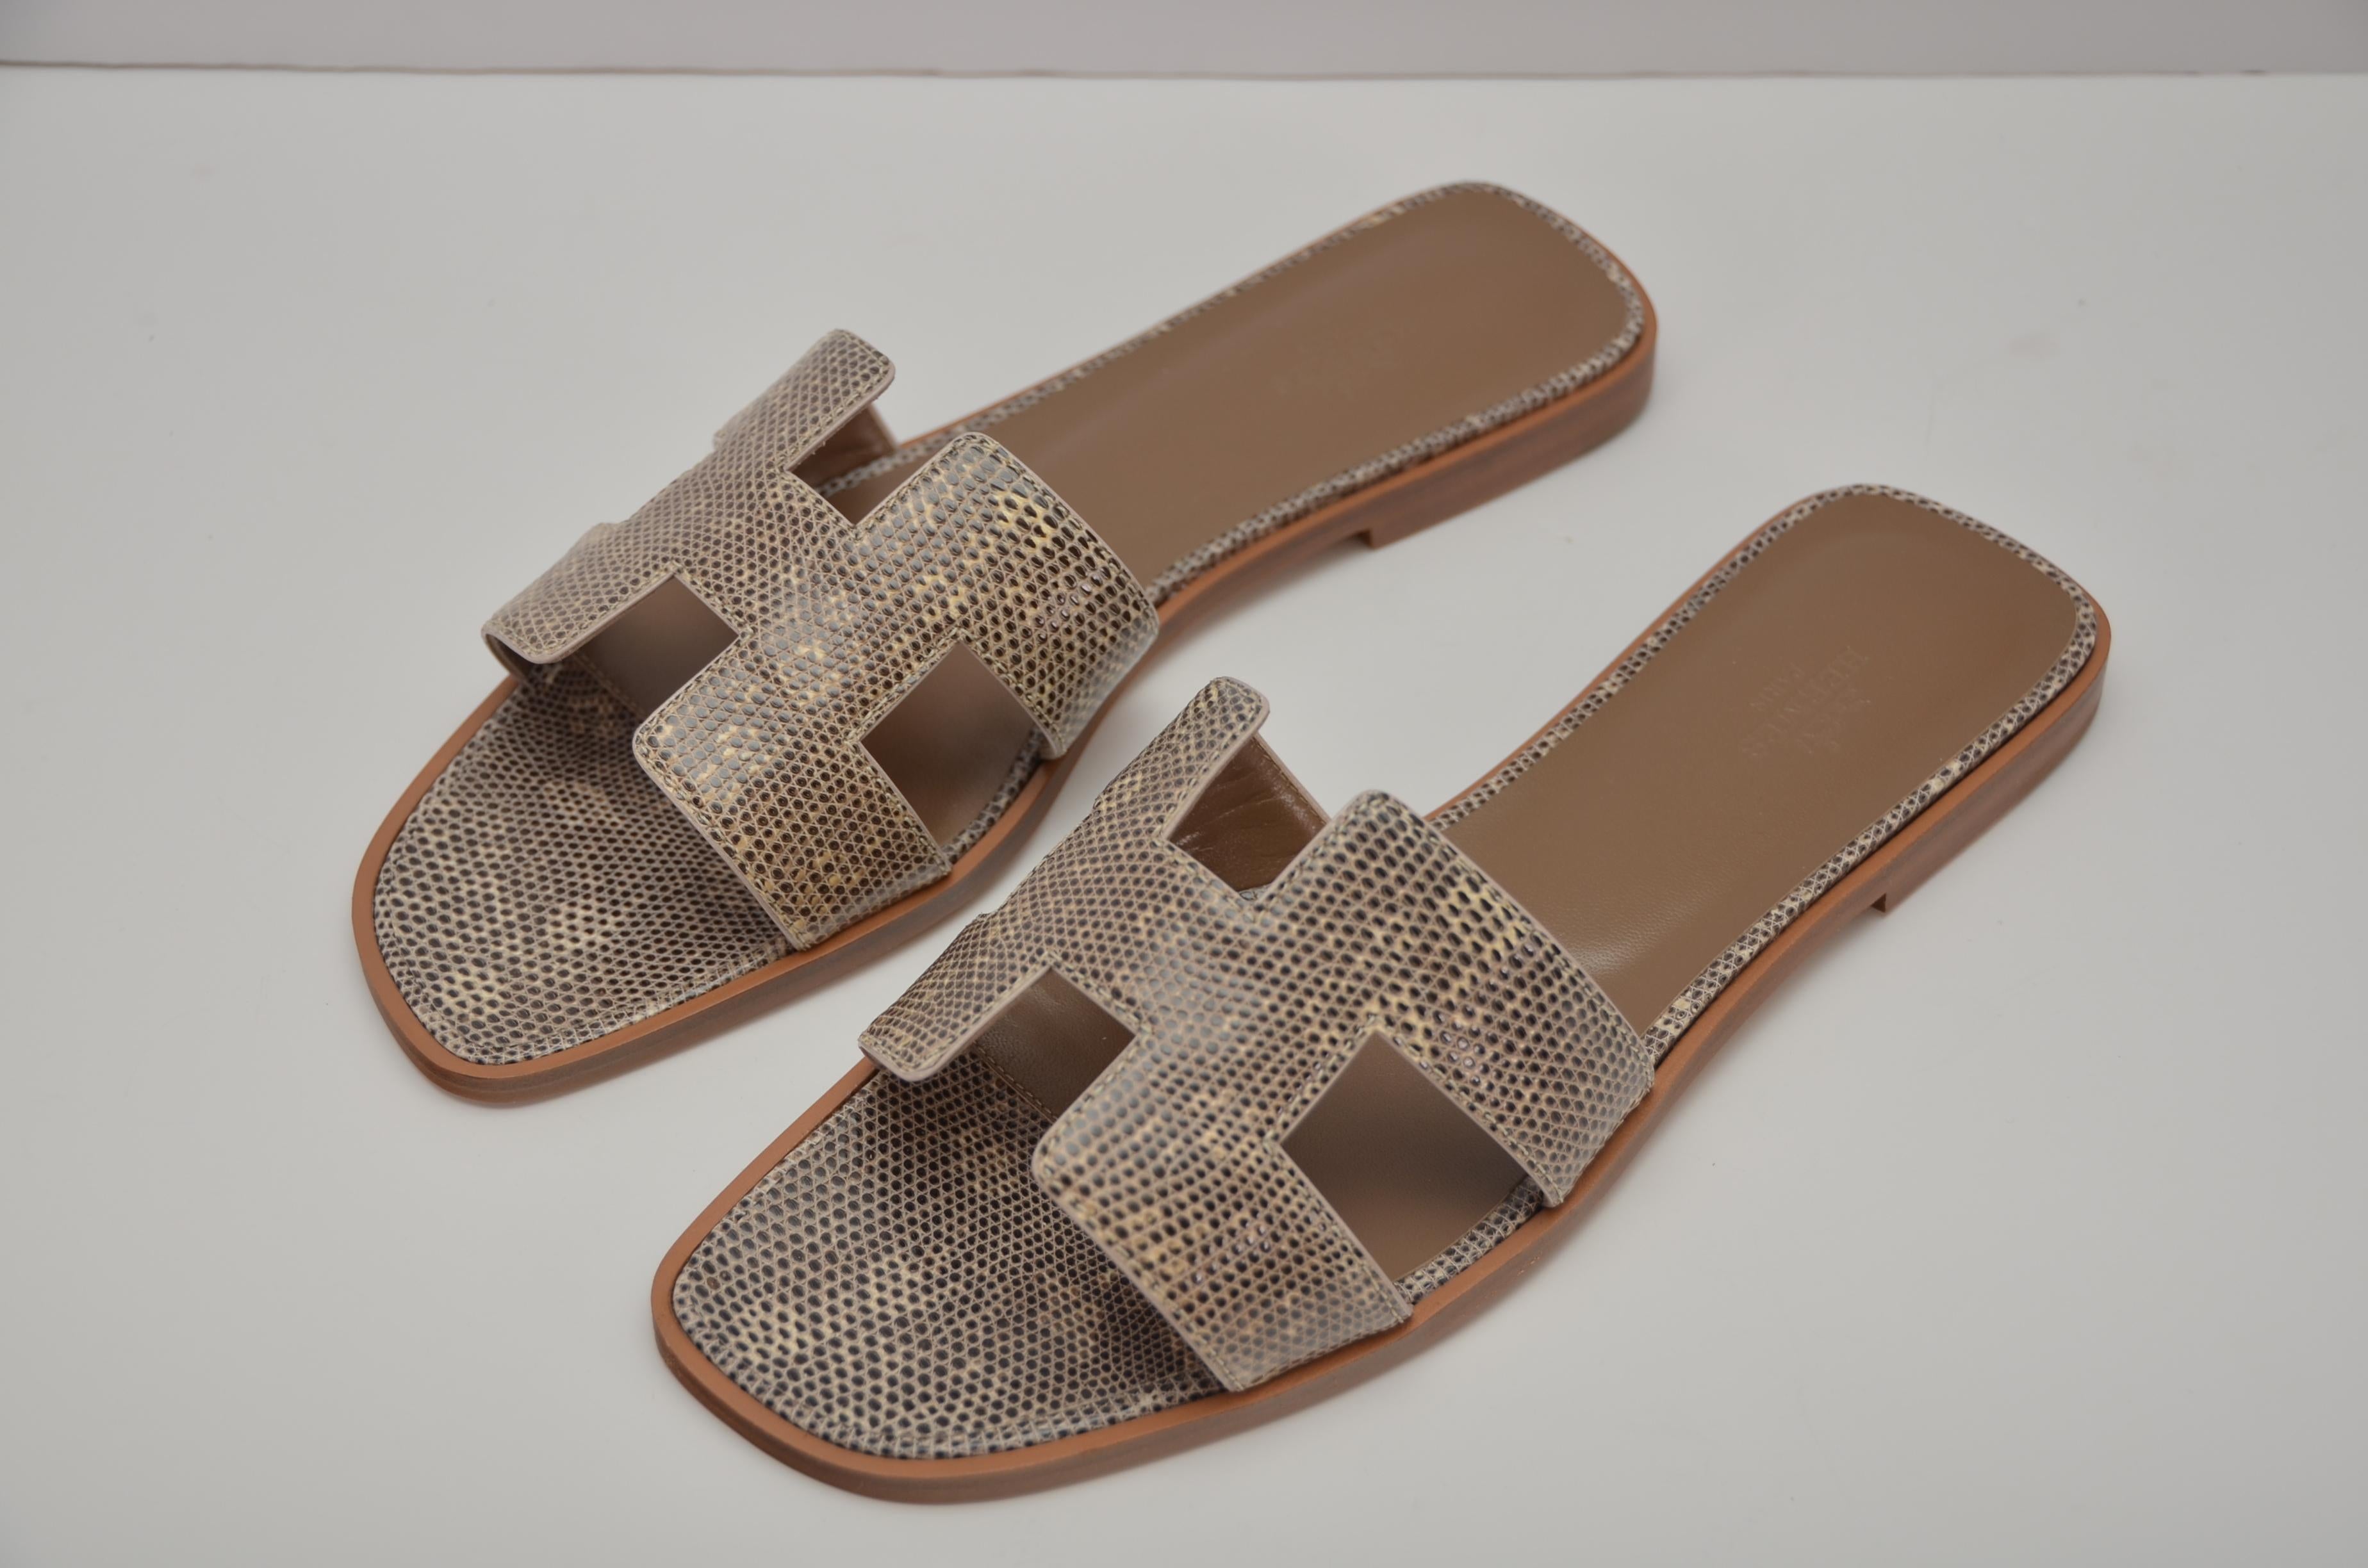 
Guaranteed 100% authentic Hermes Oran slip on sandals.
Ombre lizard skin
Size 40.Please know your sizing in Hermes shoes before purchase.
Brand new with box, dust-bags,Cites and booklet

FINAL SALE.